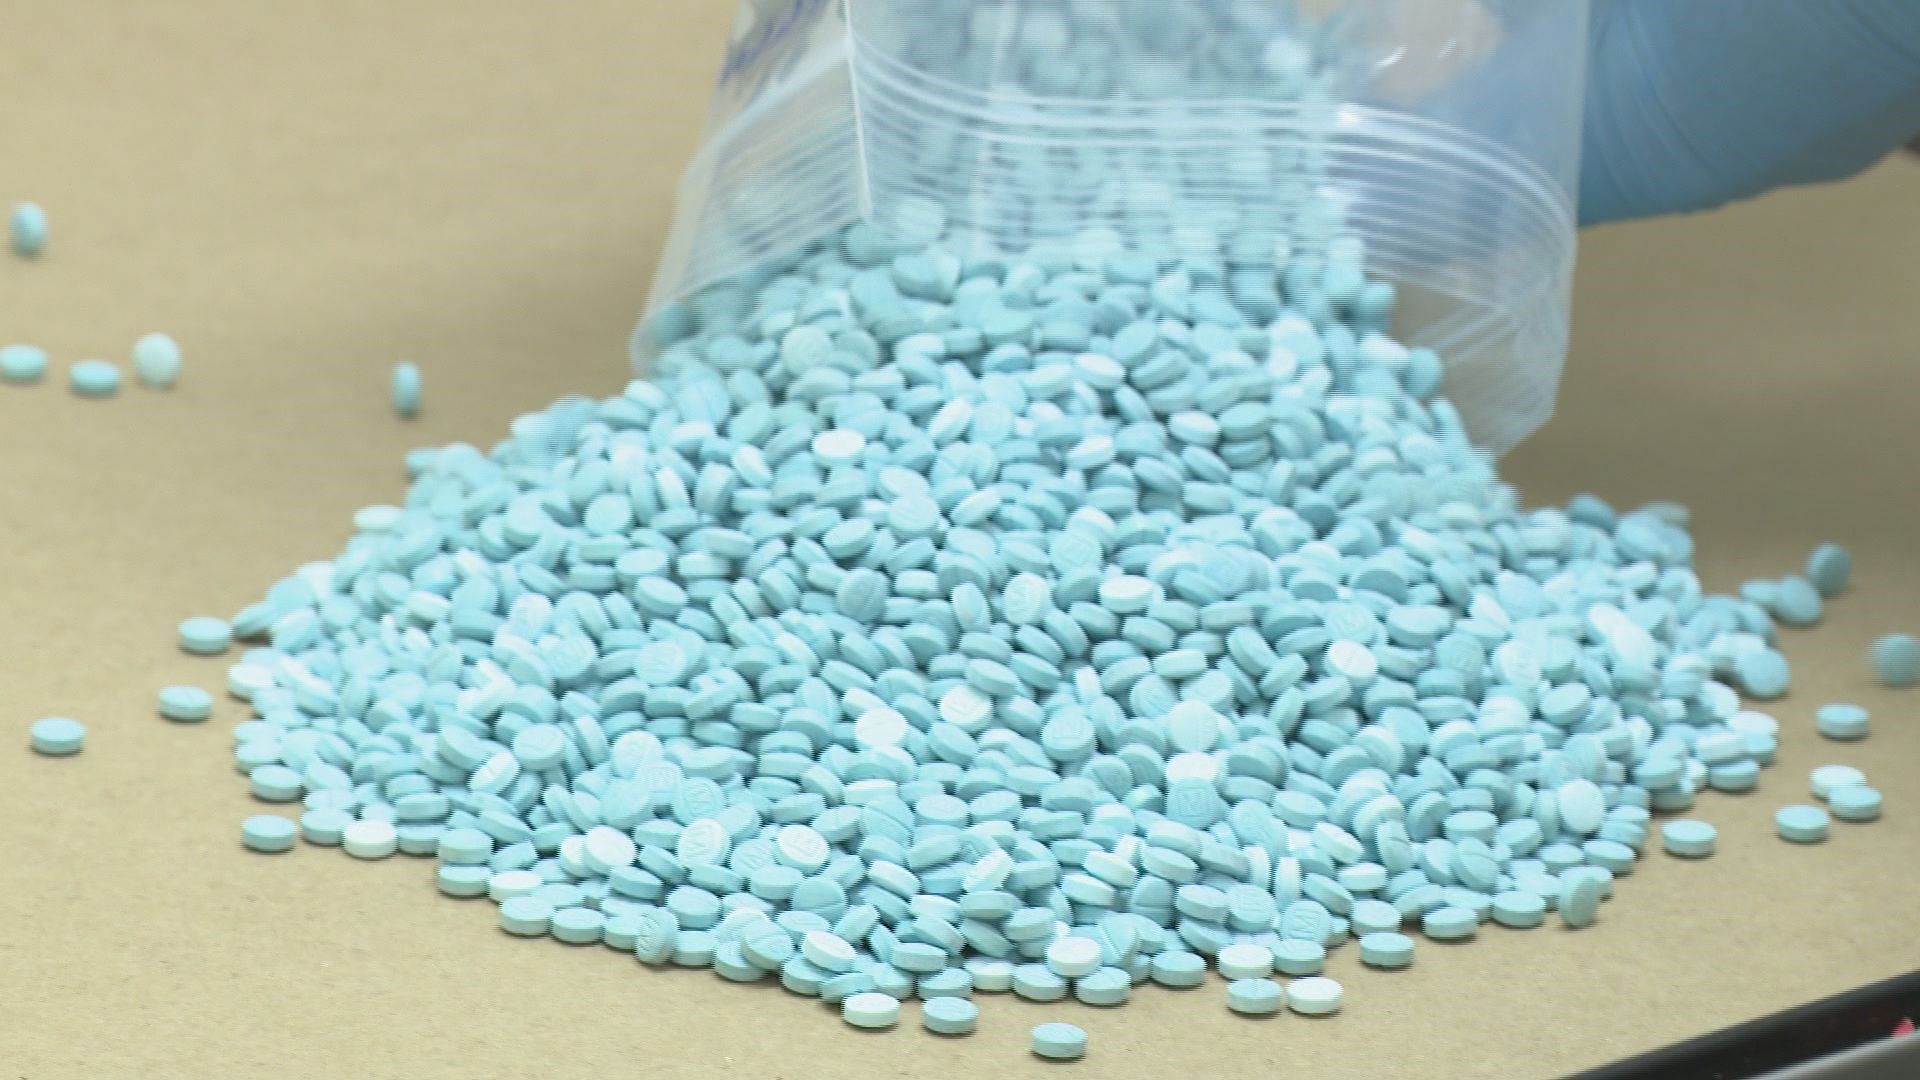 The Drug Enforcement Agency (DEA) is seizing more and more fentanyl-laced, fake prescription pills nationwide, as well as here in Michigan.